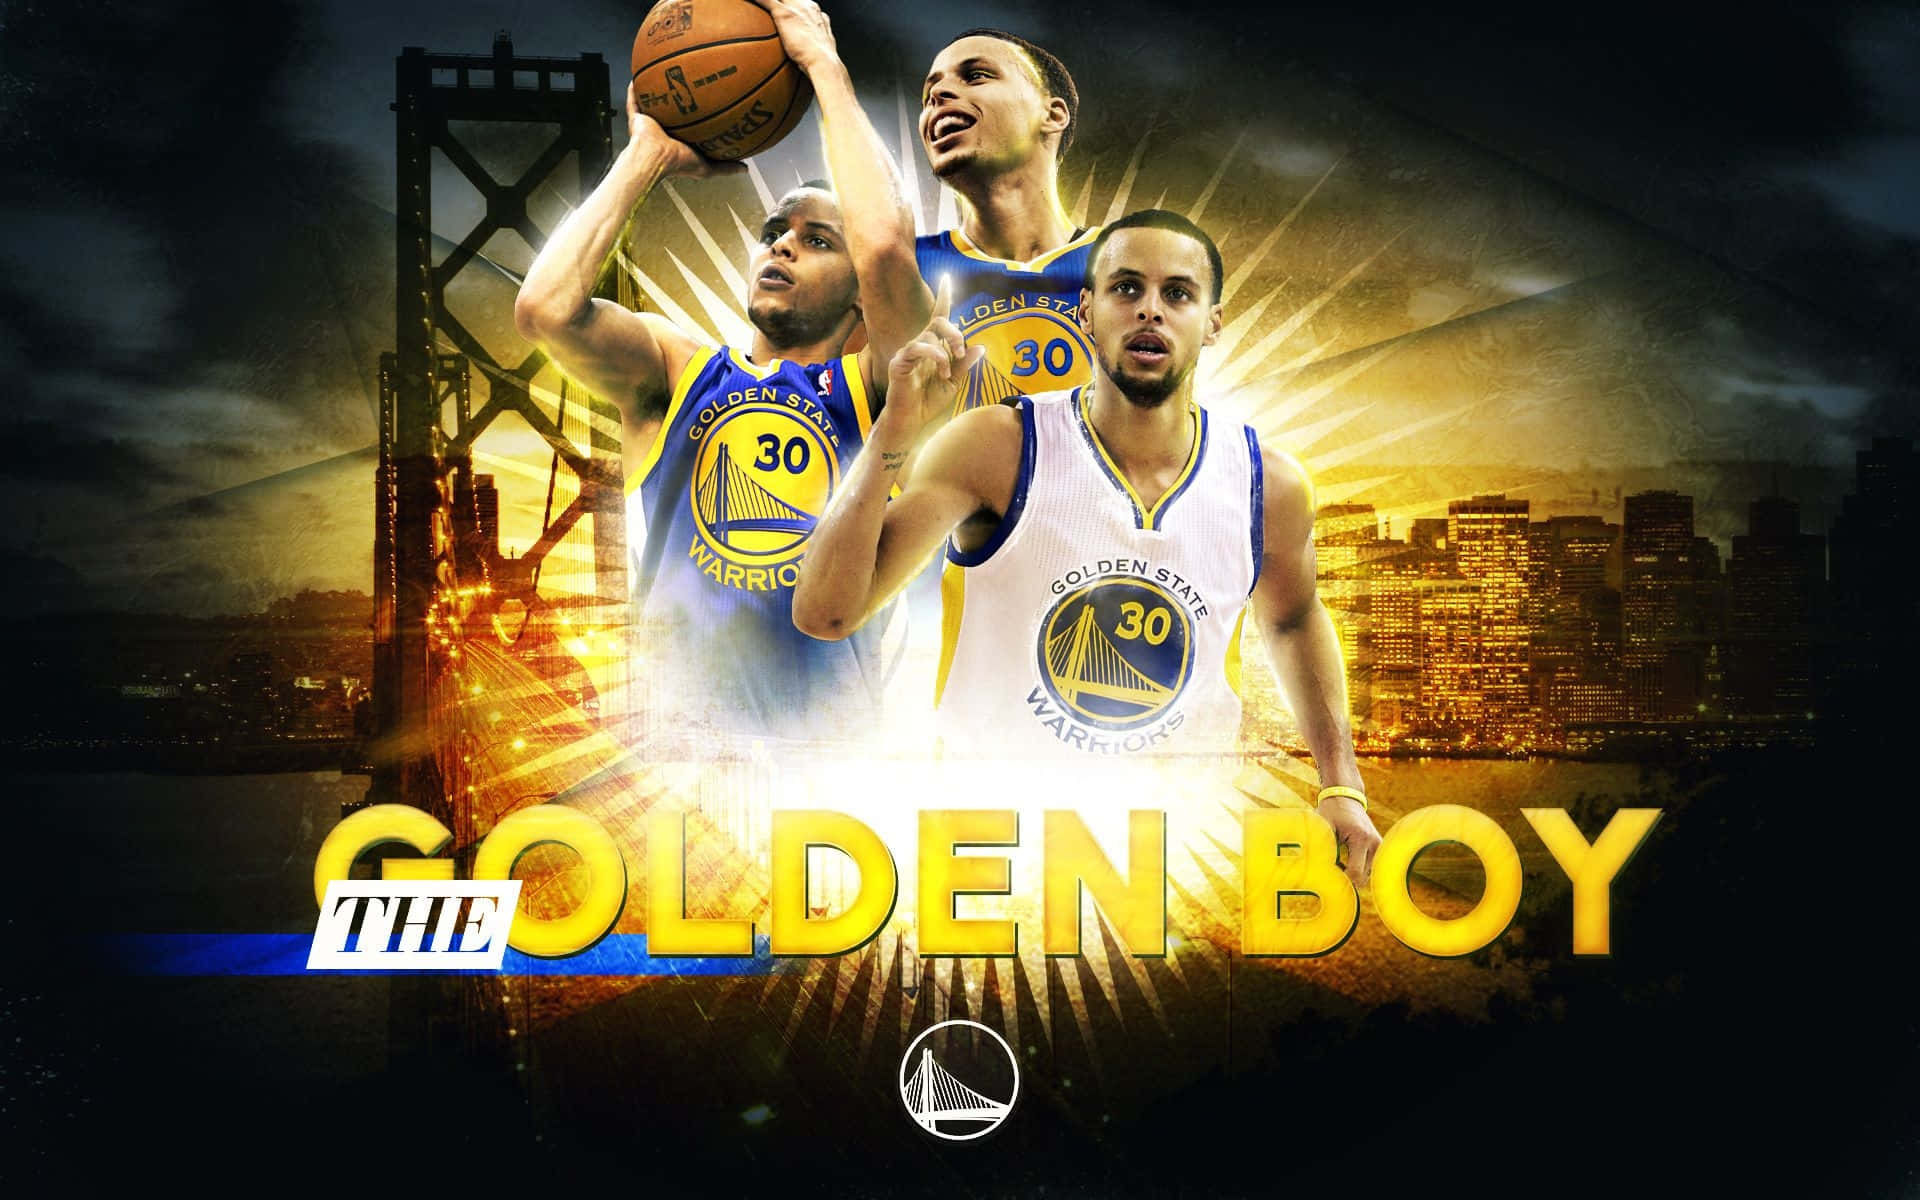 Stephen Curry Cool Golden Boy Background